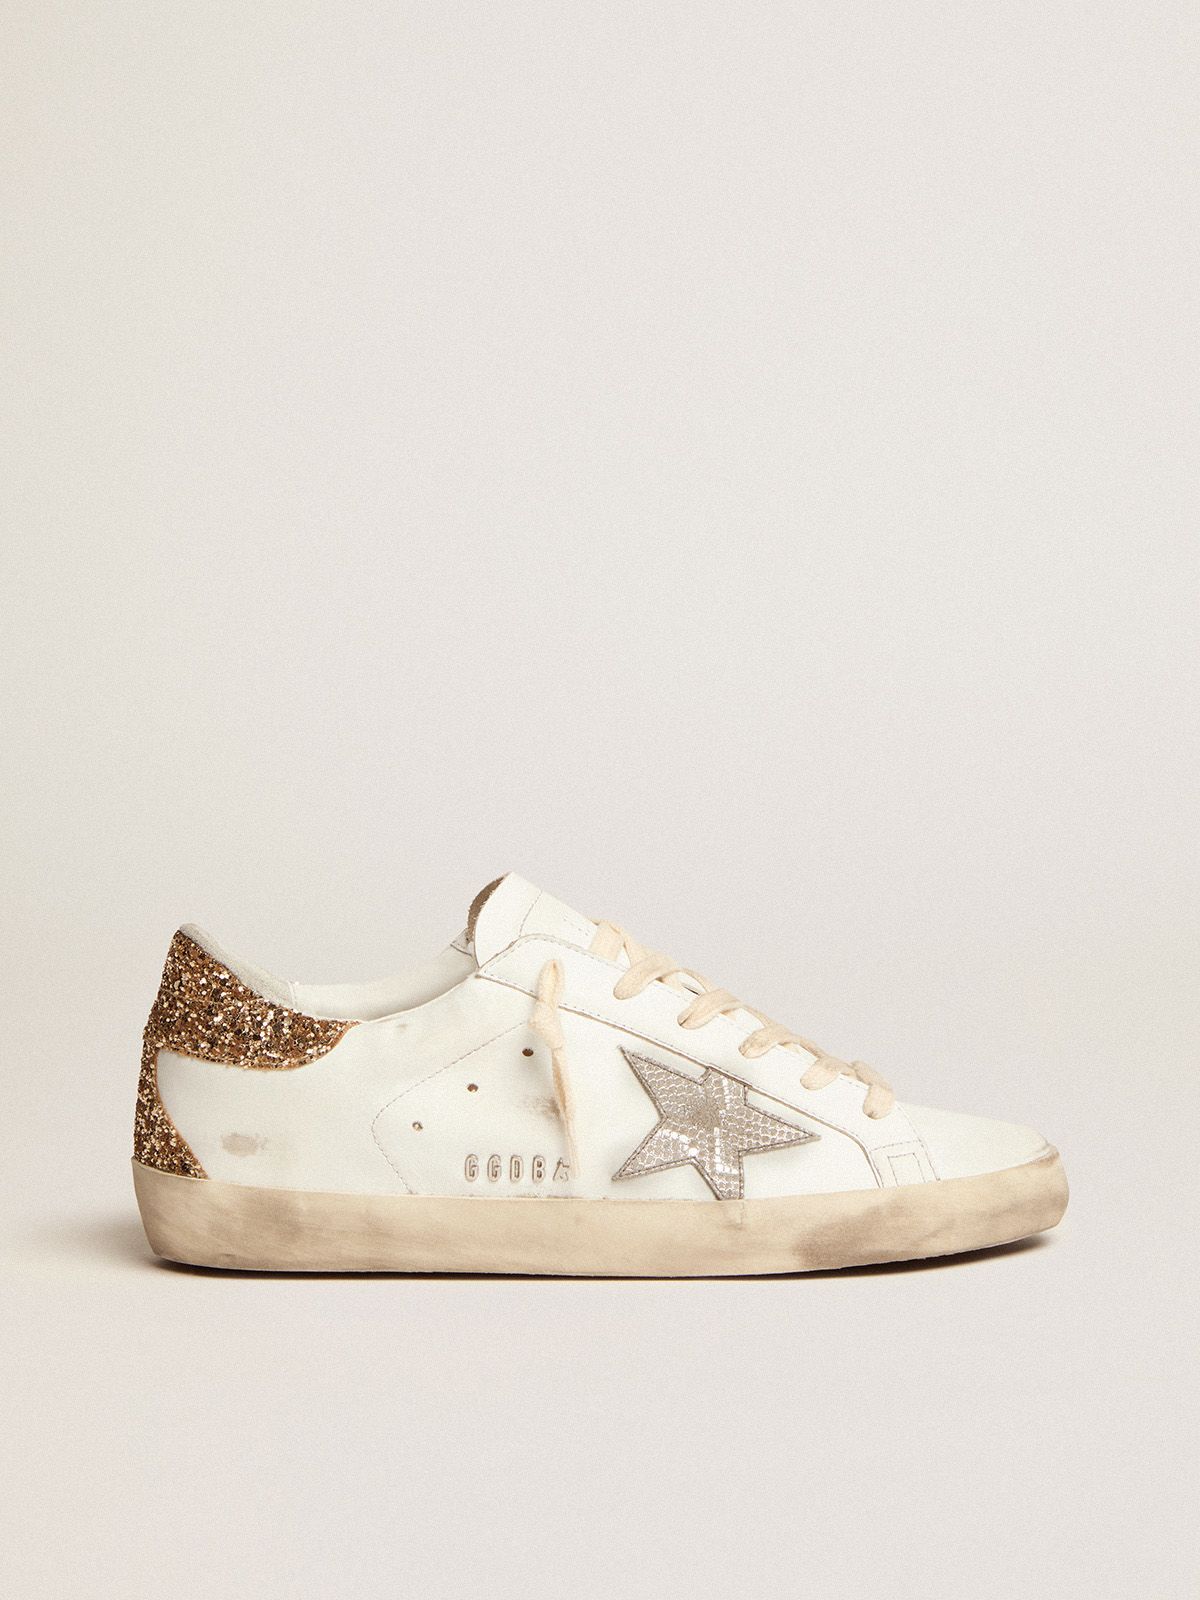 Super-Star sneakers with snake-print silver leather star and gold glitter heel tab